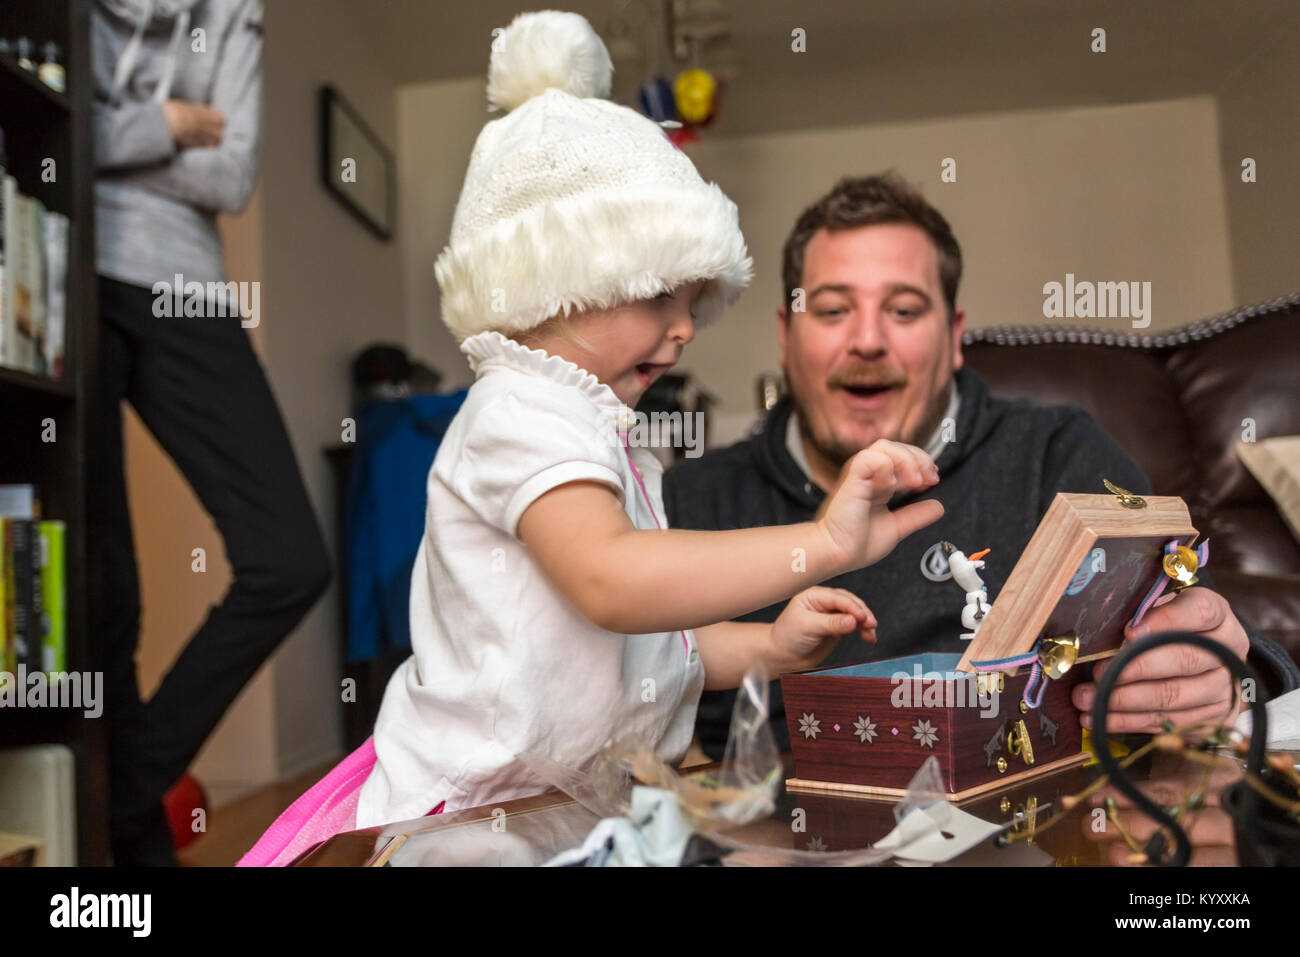 father and child playing with music box Stock Photo